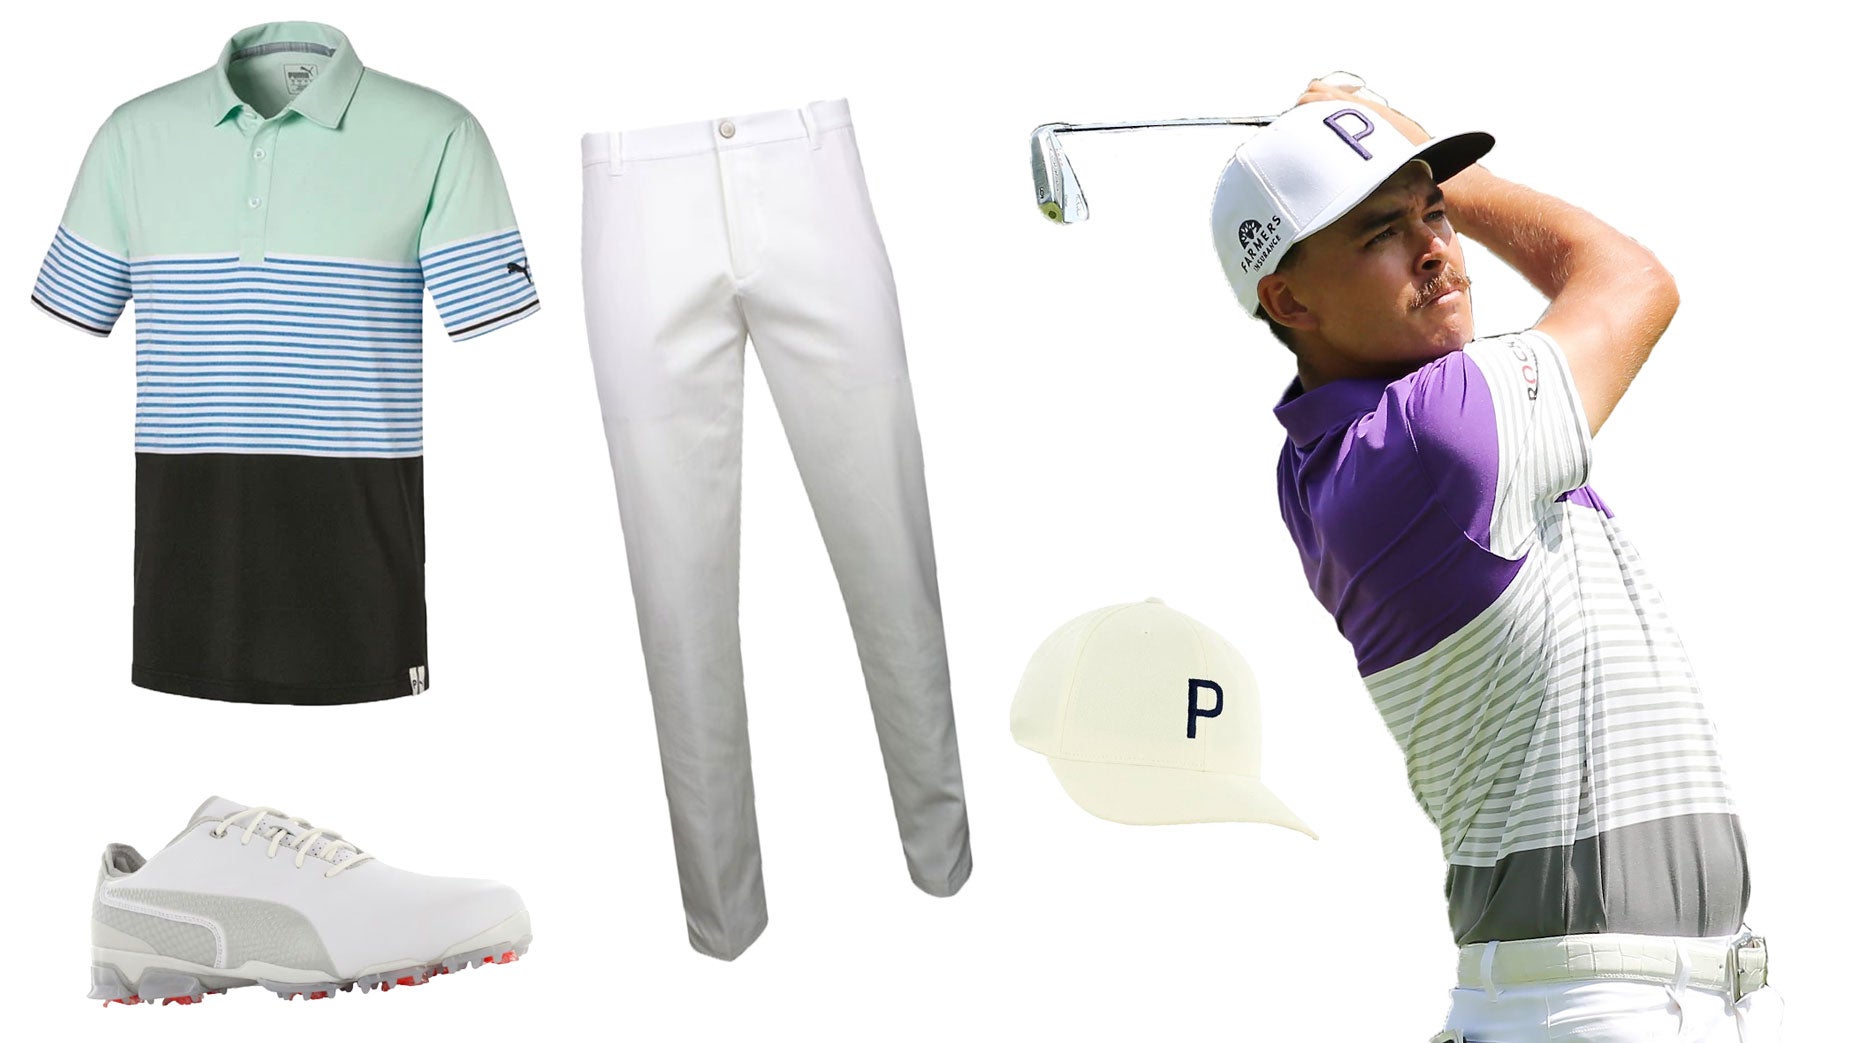 Dress like Rickie Fowler: Fashion and function can coexist